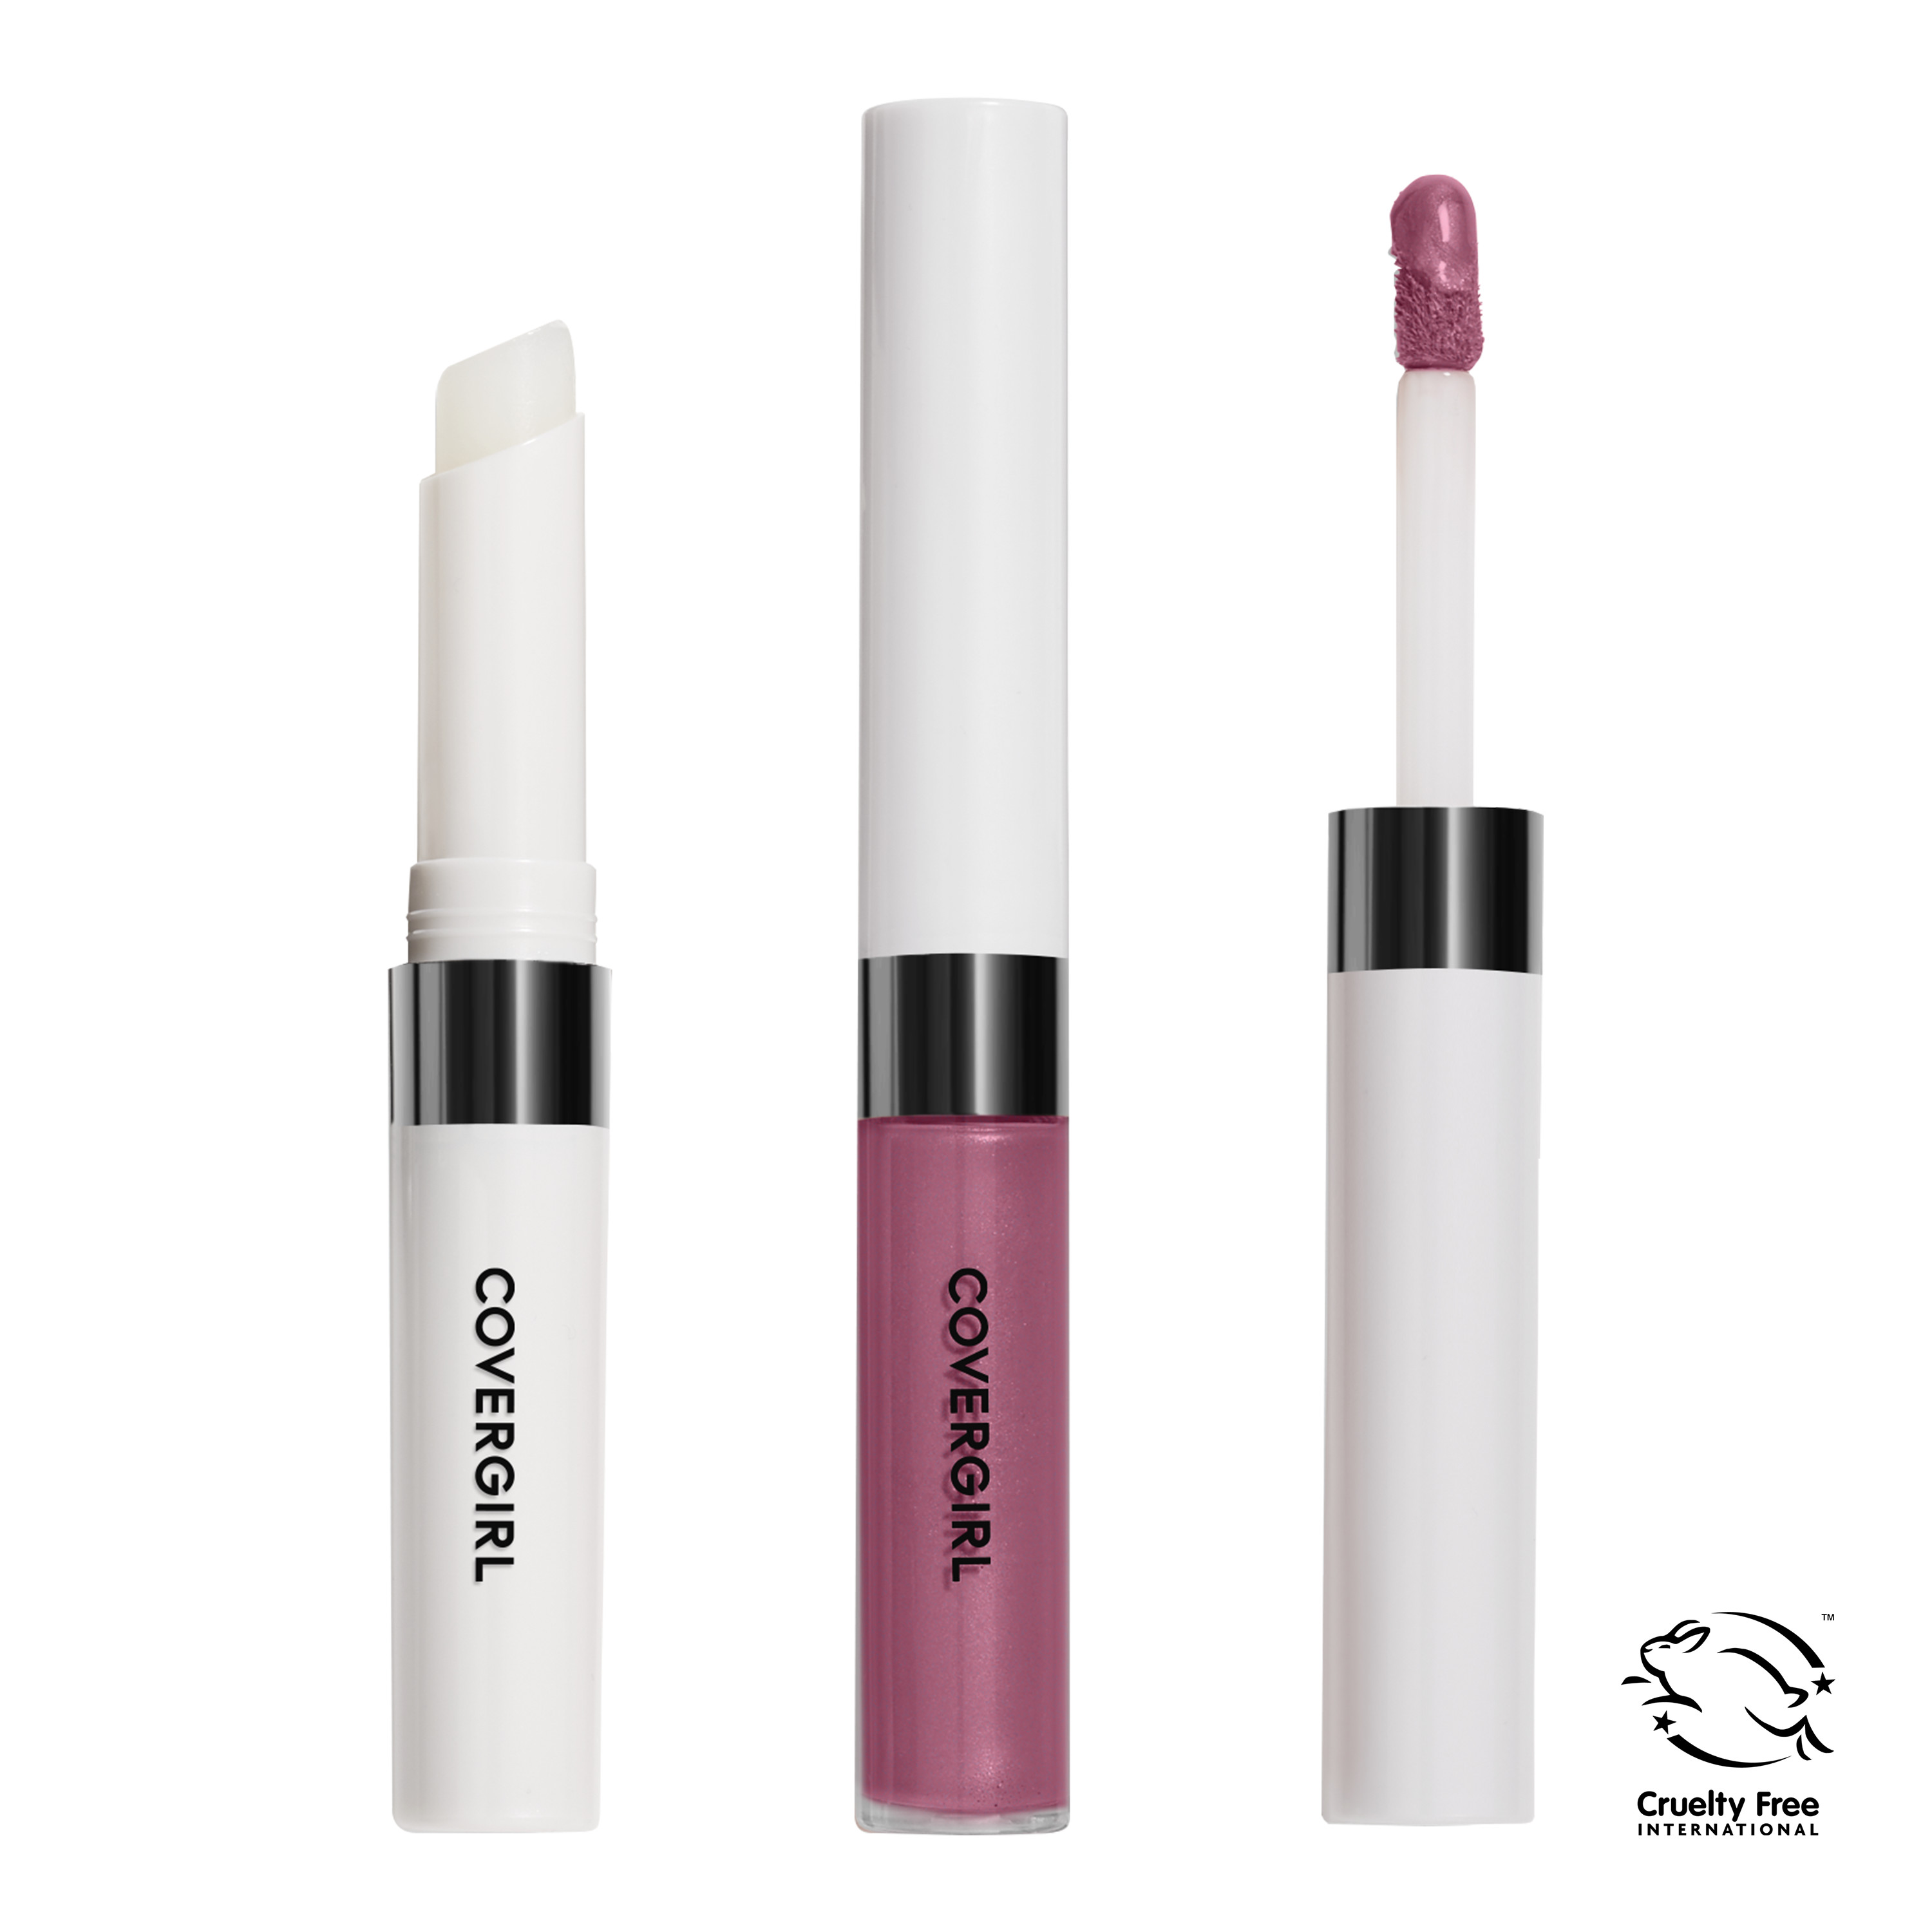 COVERGIRL Outlast All-Day Lip Color Liquid Lipstick and Moisturizing Topcoat, Wild Berry - image 1 of 10